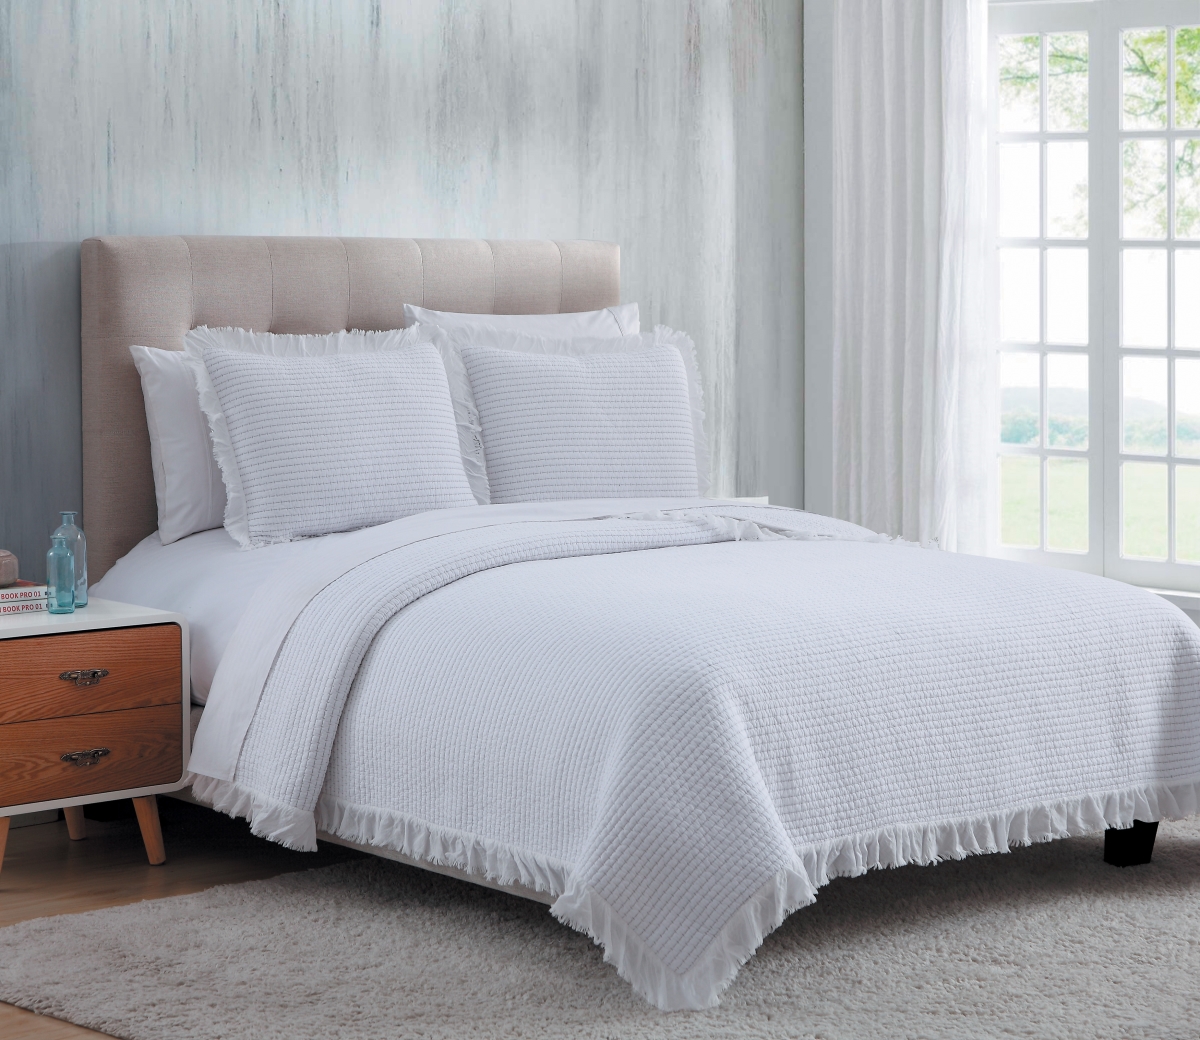 Q170.w6990 Beautiful Cotton Quilt Set With Textured Design & Fringed Borders, White